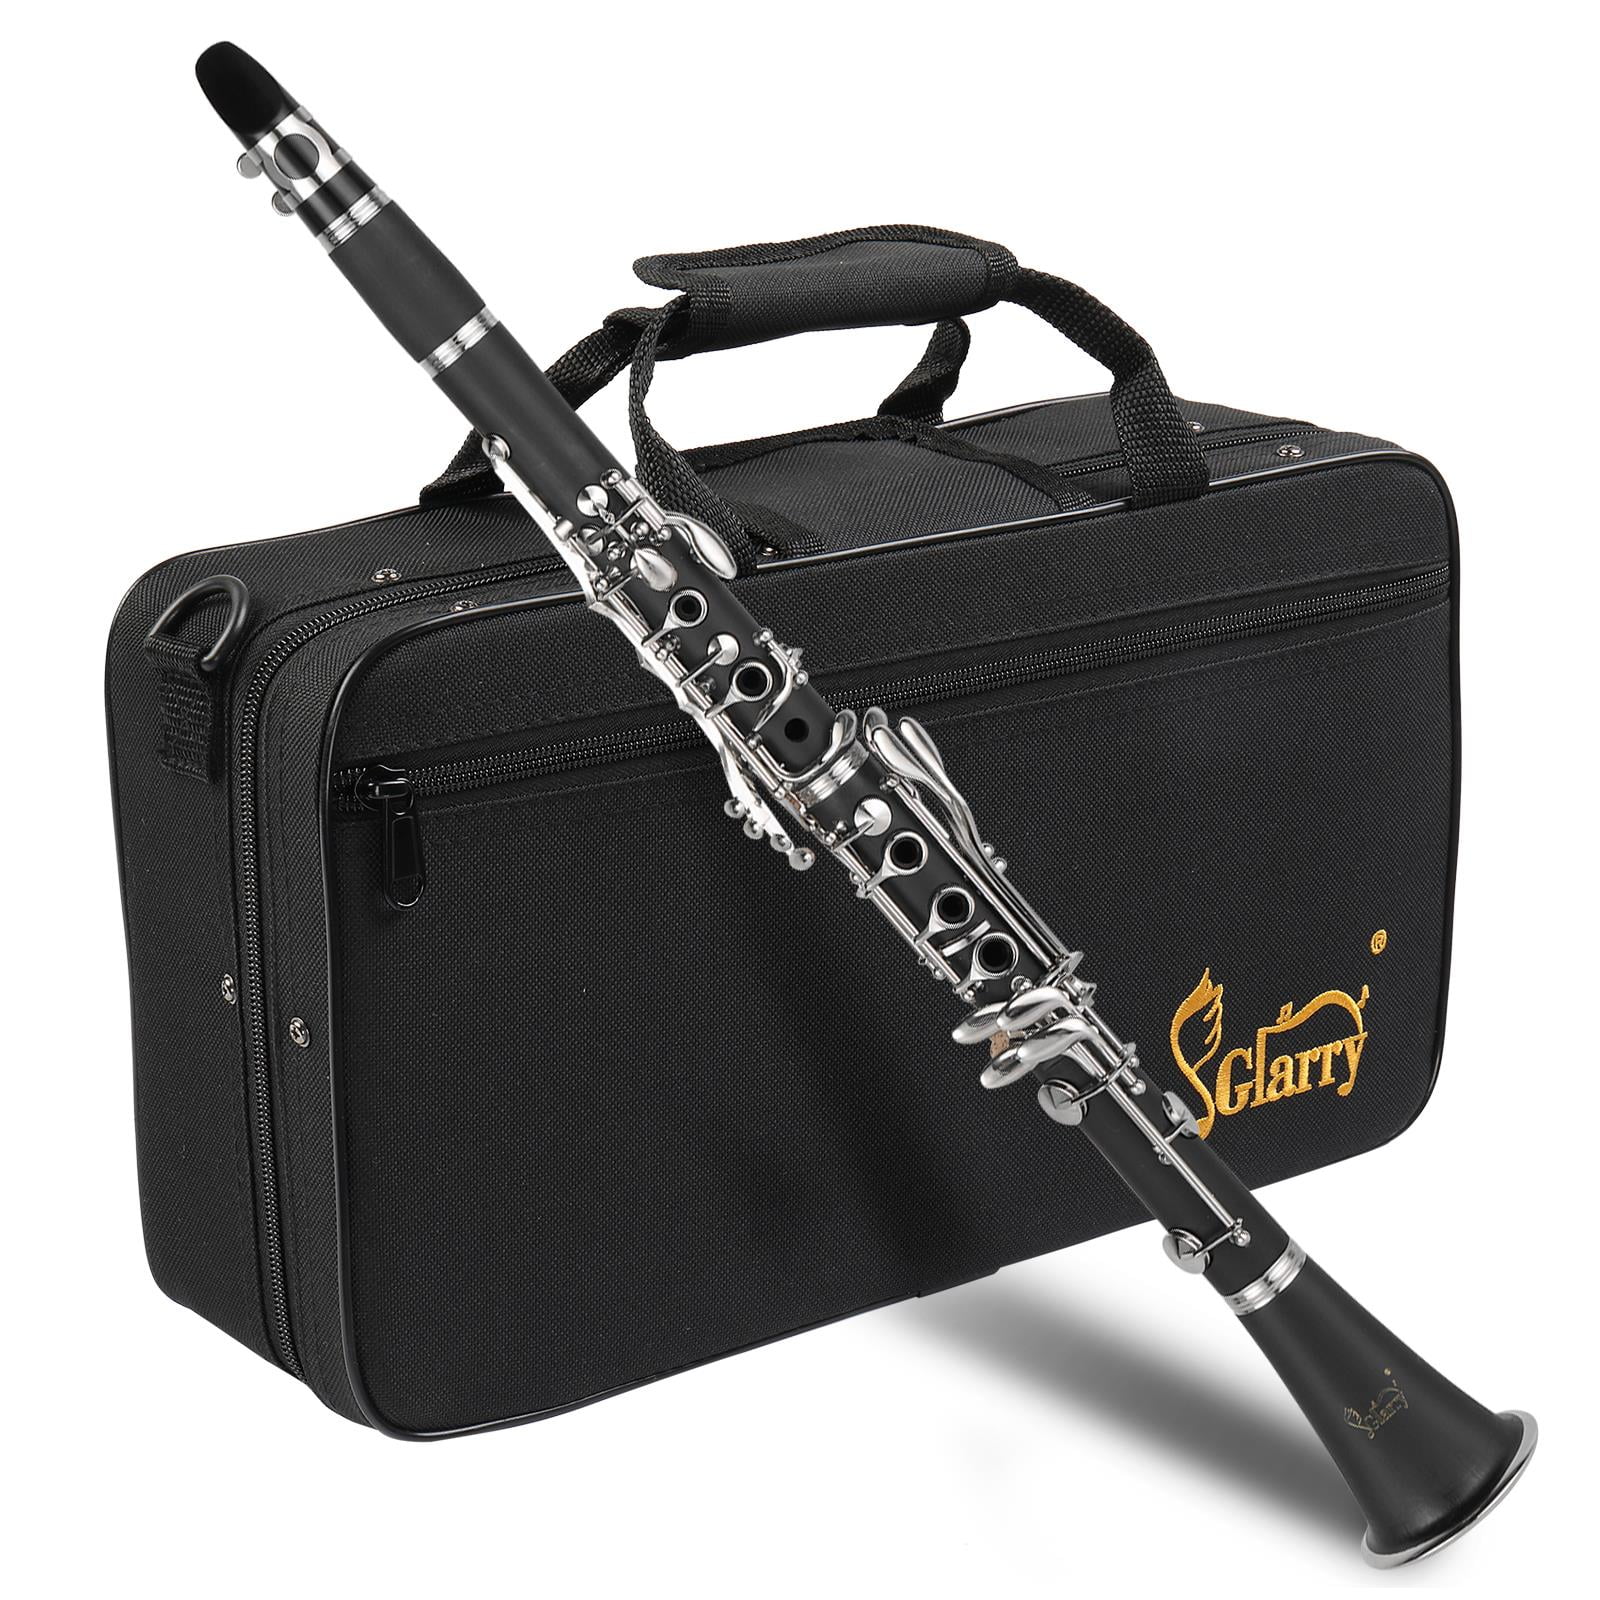 Mendini by Cecillio Bb Clarinet Woodwind Band ＆ Orchestra Musical Instruments for Beginners Includes Case, Stand, Pocketbook, Mouthpiece, 10 Reed